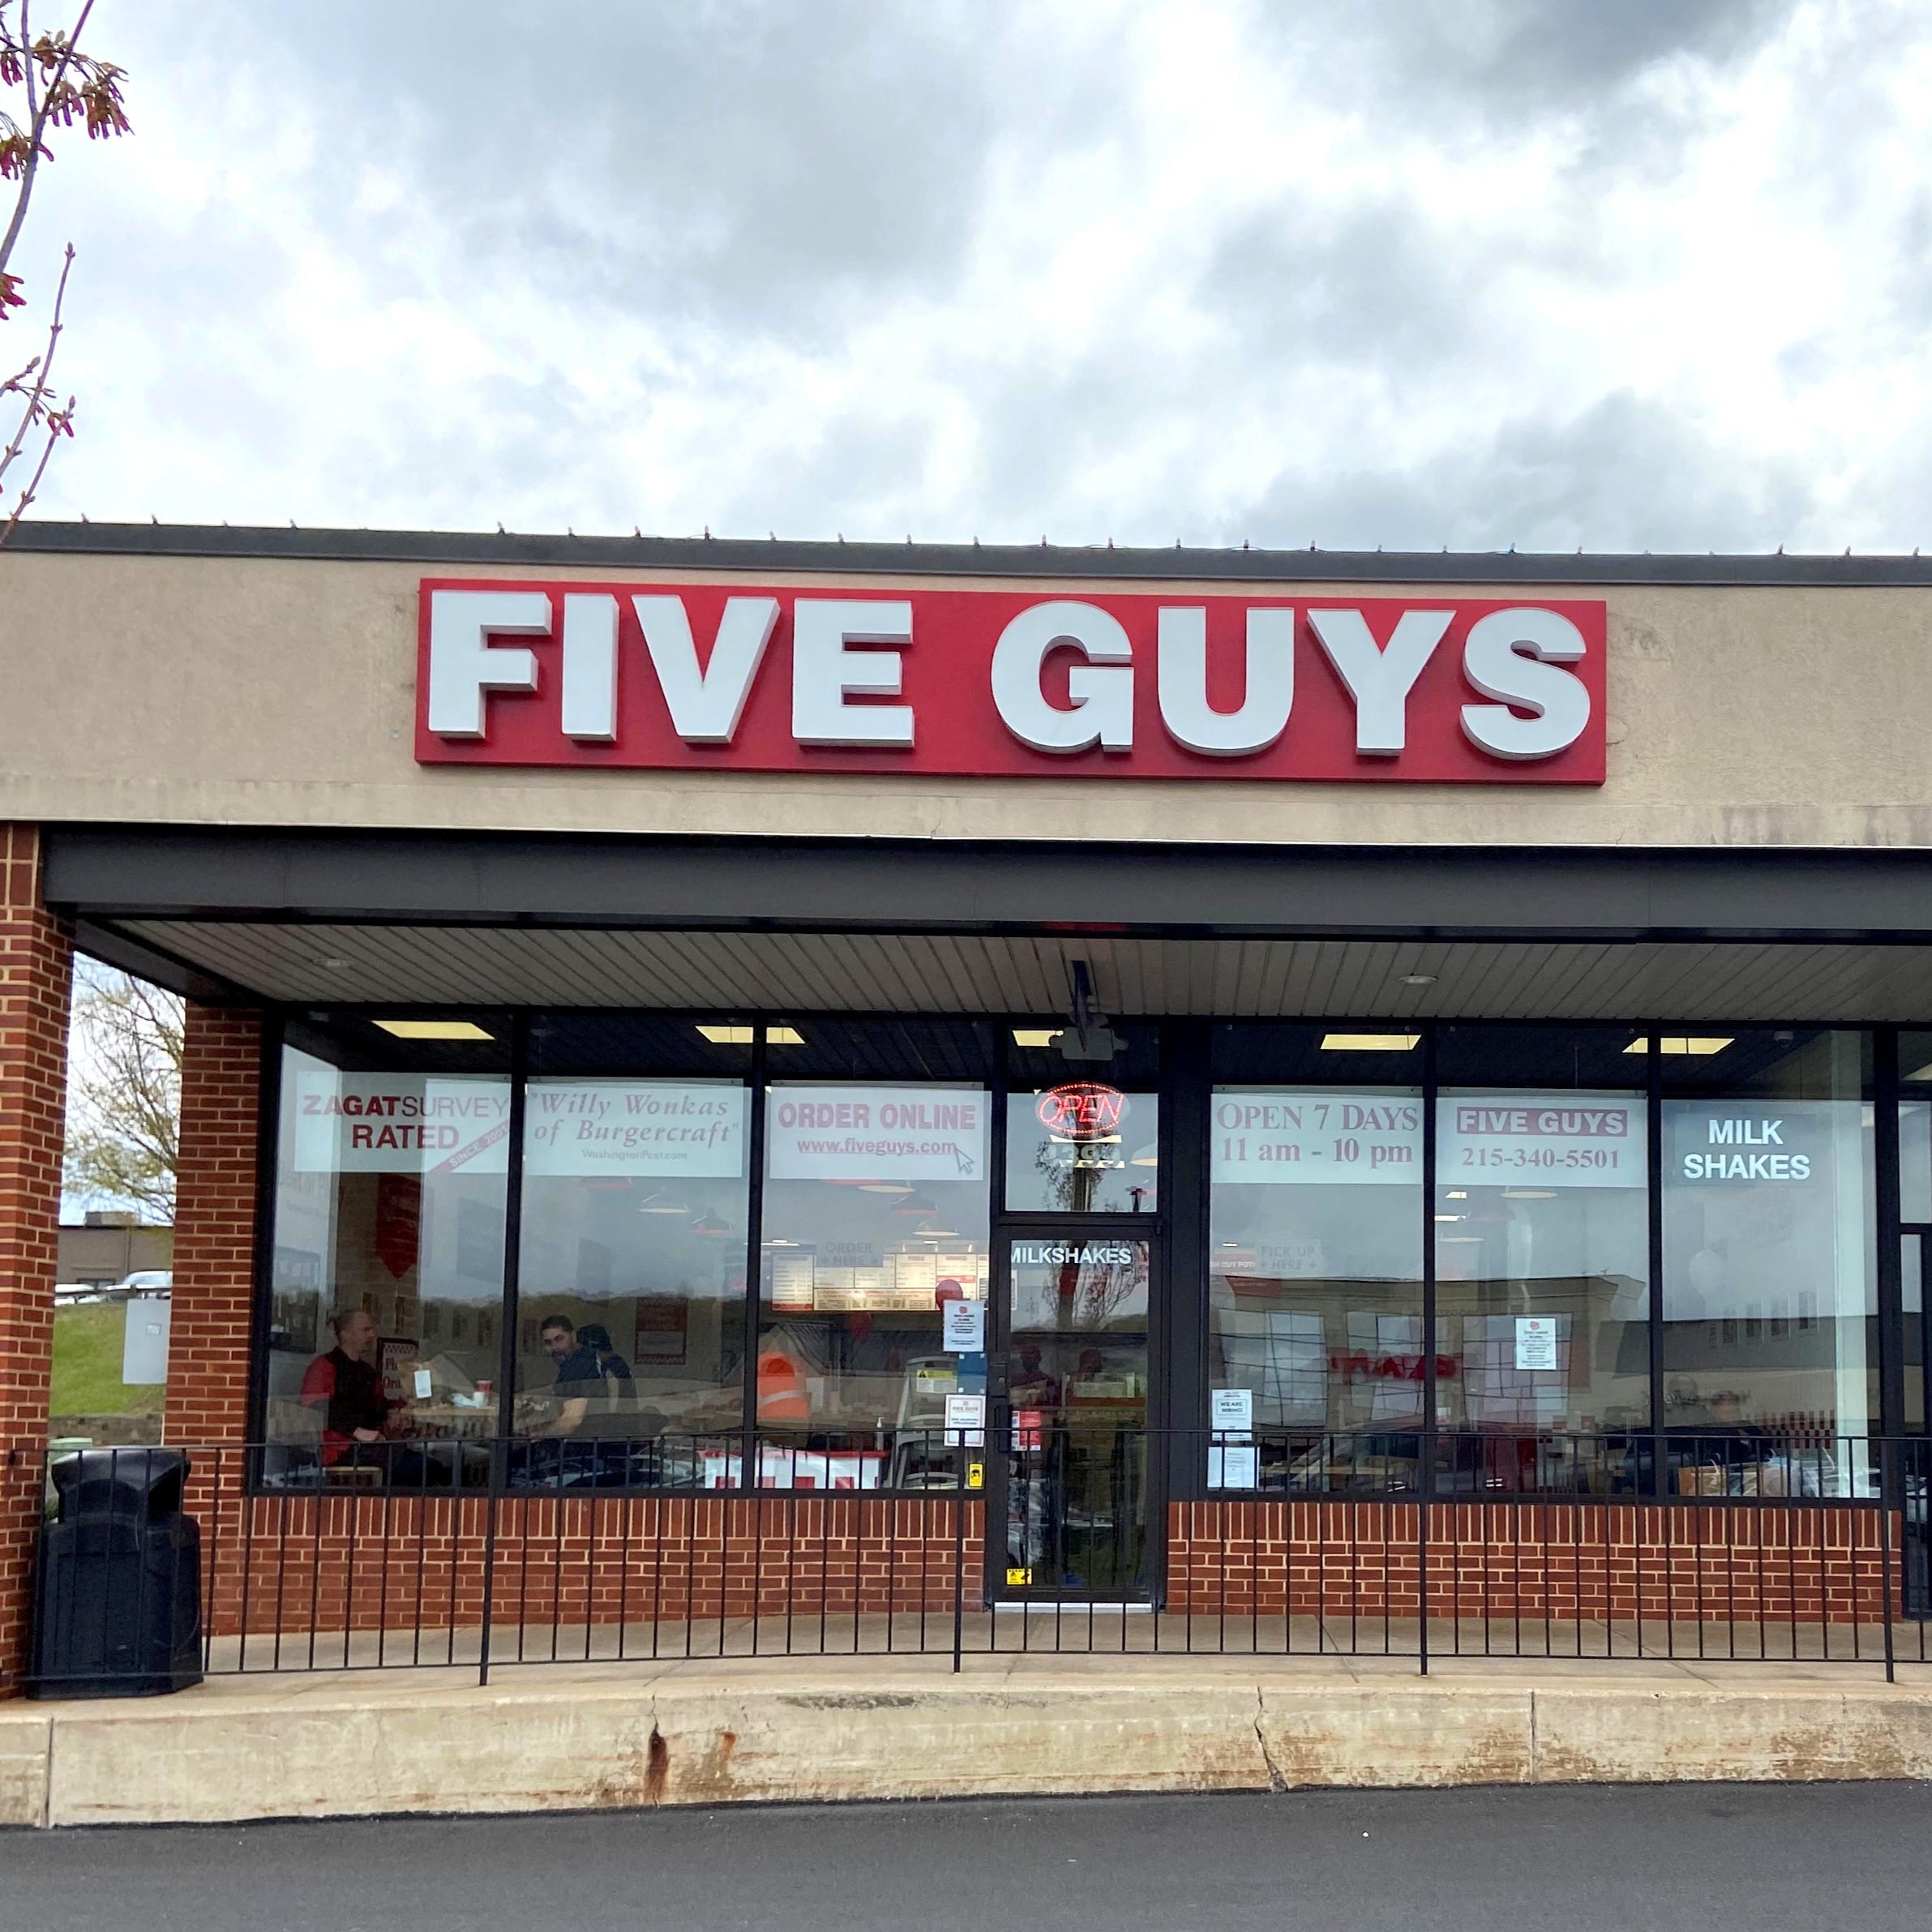 Five Guys at 4399 West Swamp Rd. in Doylestown, PA.